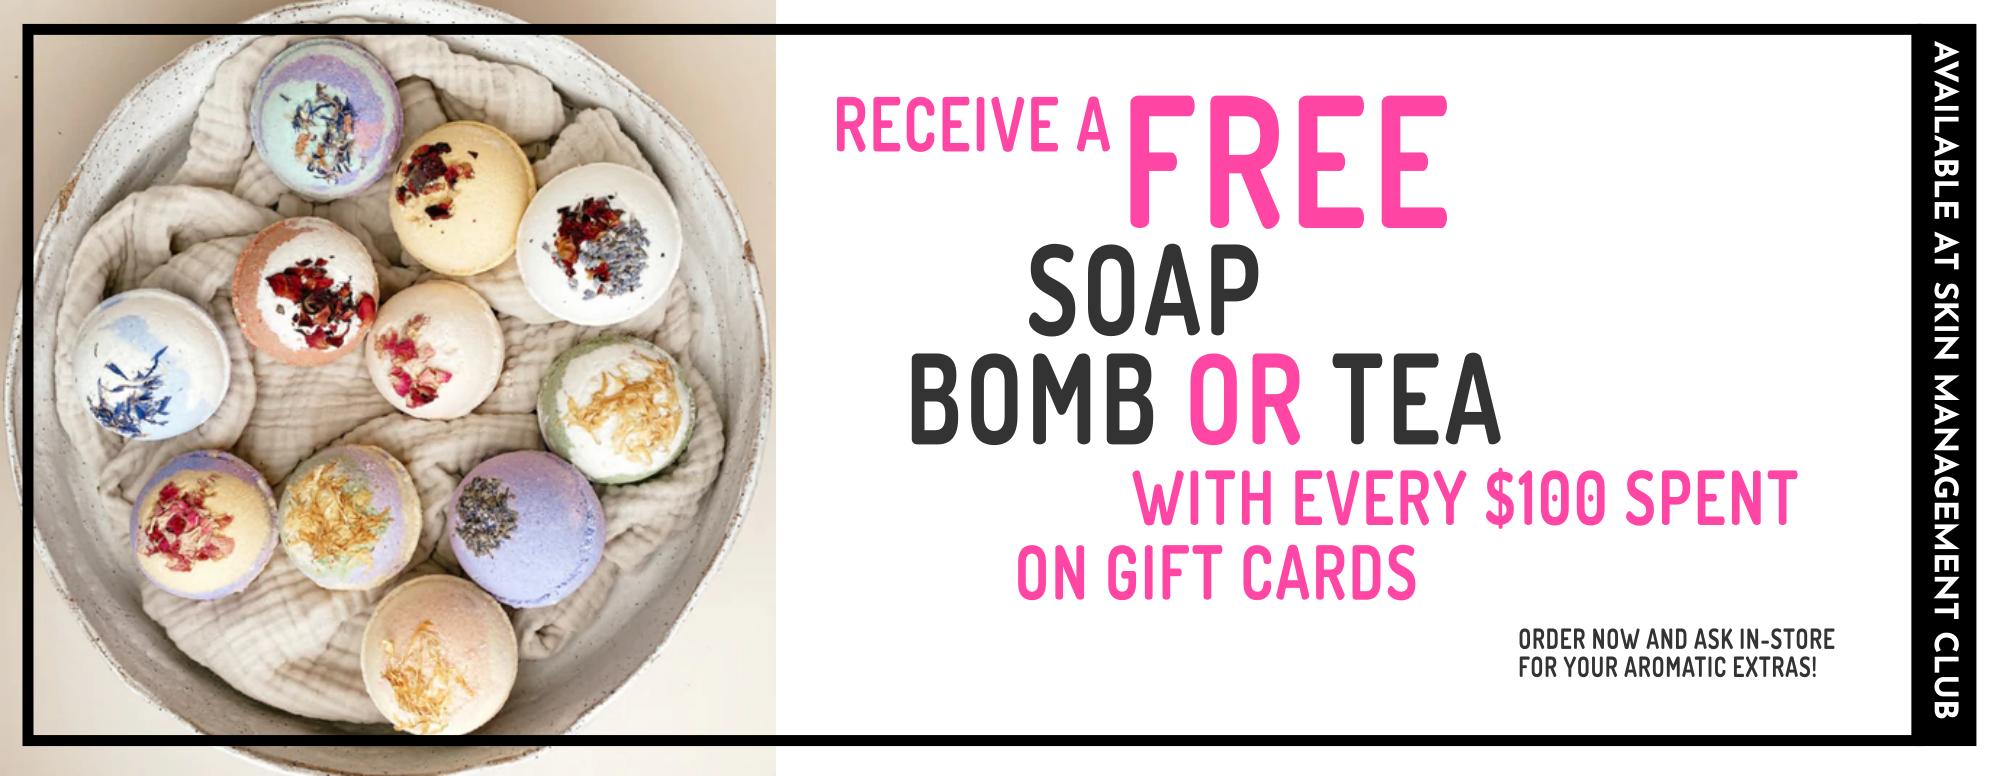 Gift Cards for Facials, Treatments and Skincare Products + Get free bath bombs, soaps and teas!